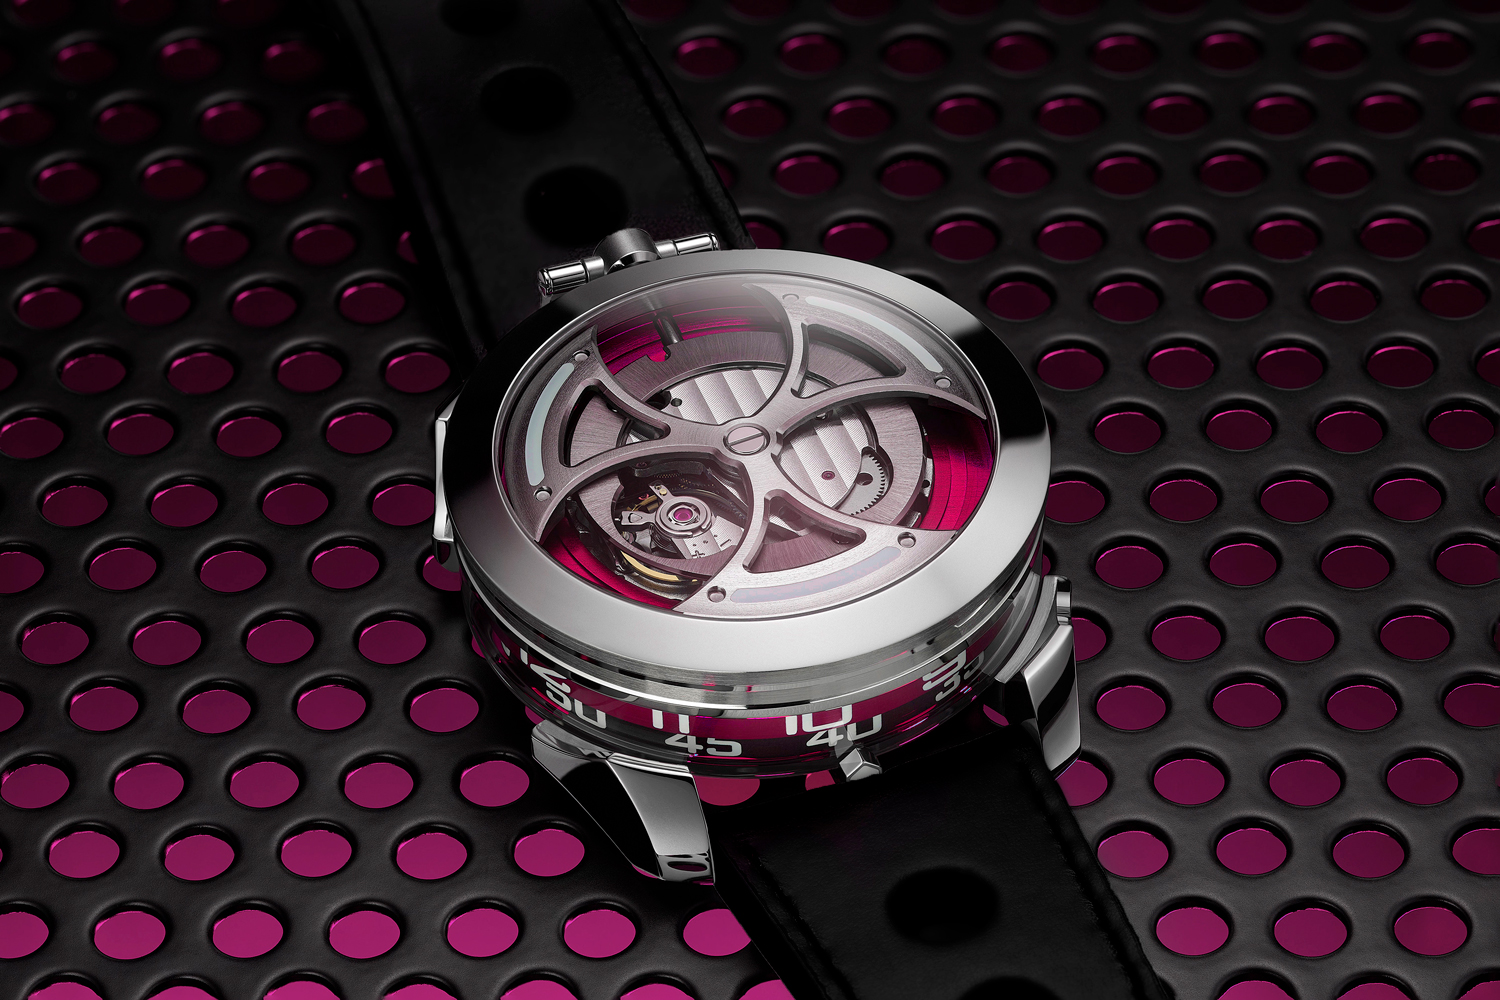 The M.A.D.1 Pink Dial Project unique piece, created for #ThePinkDialProject shattered all expectations.